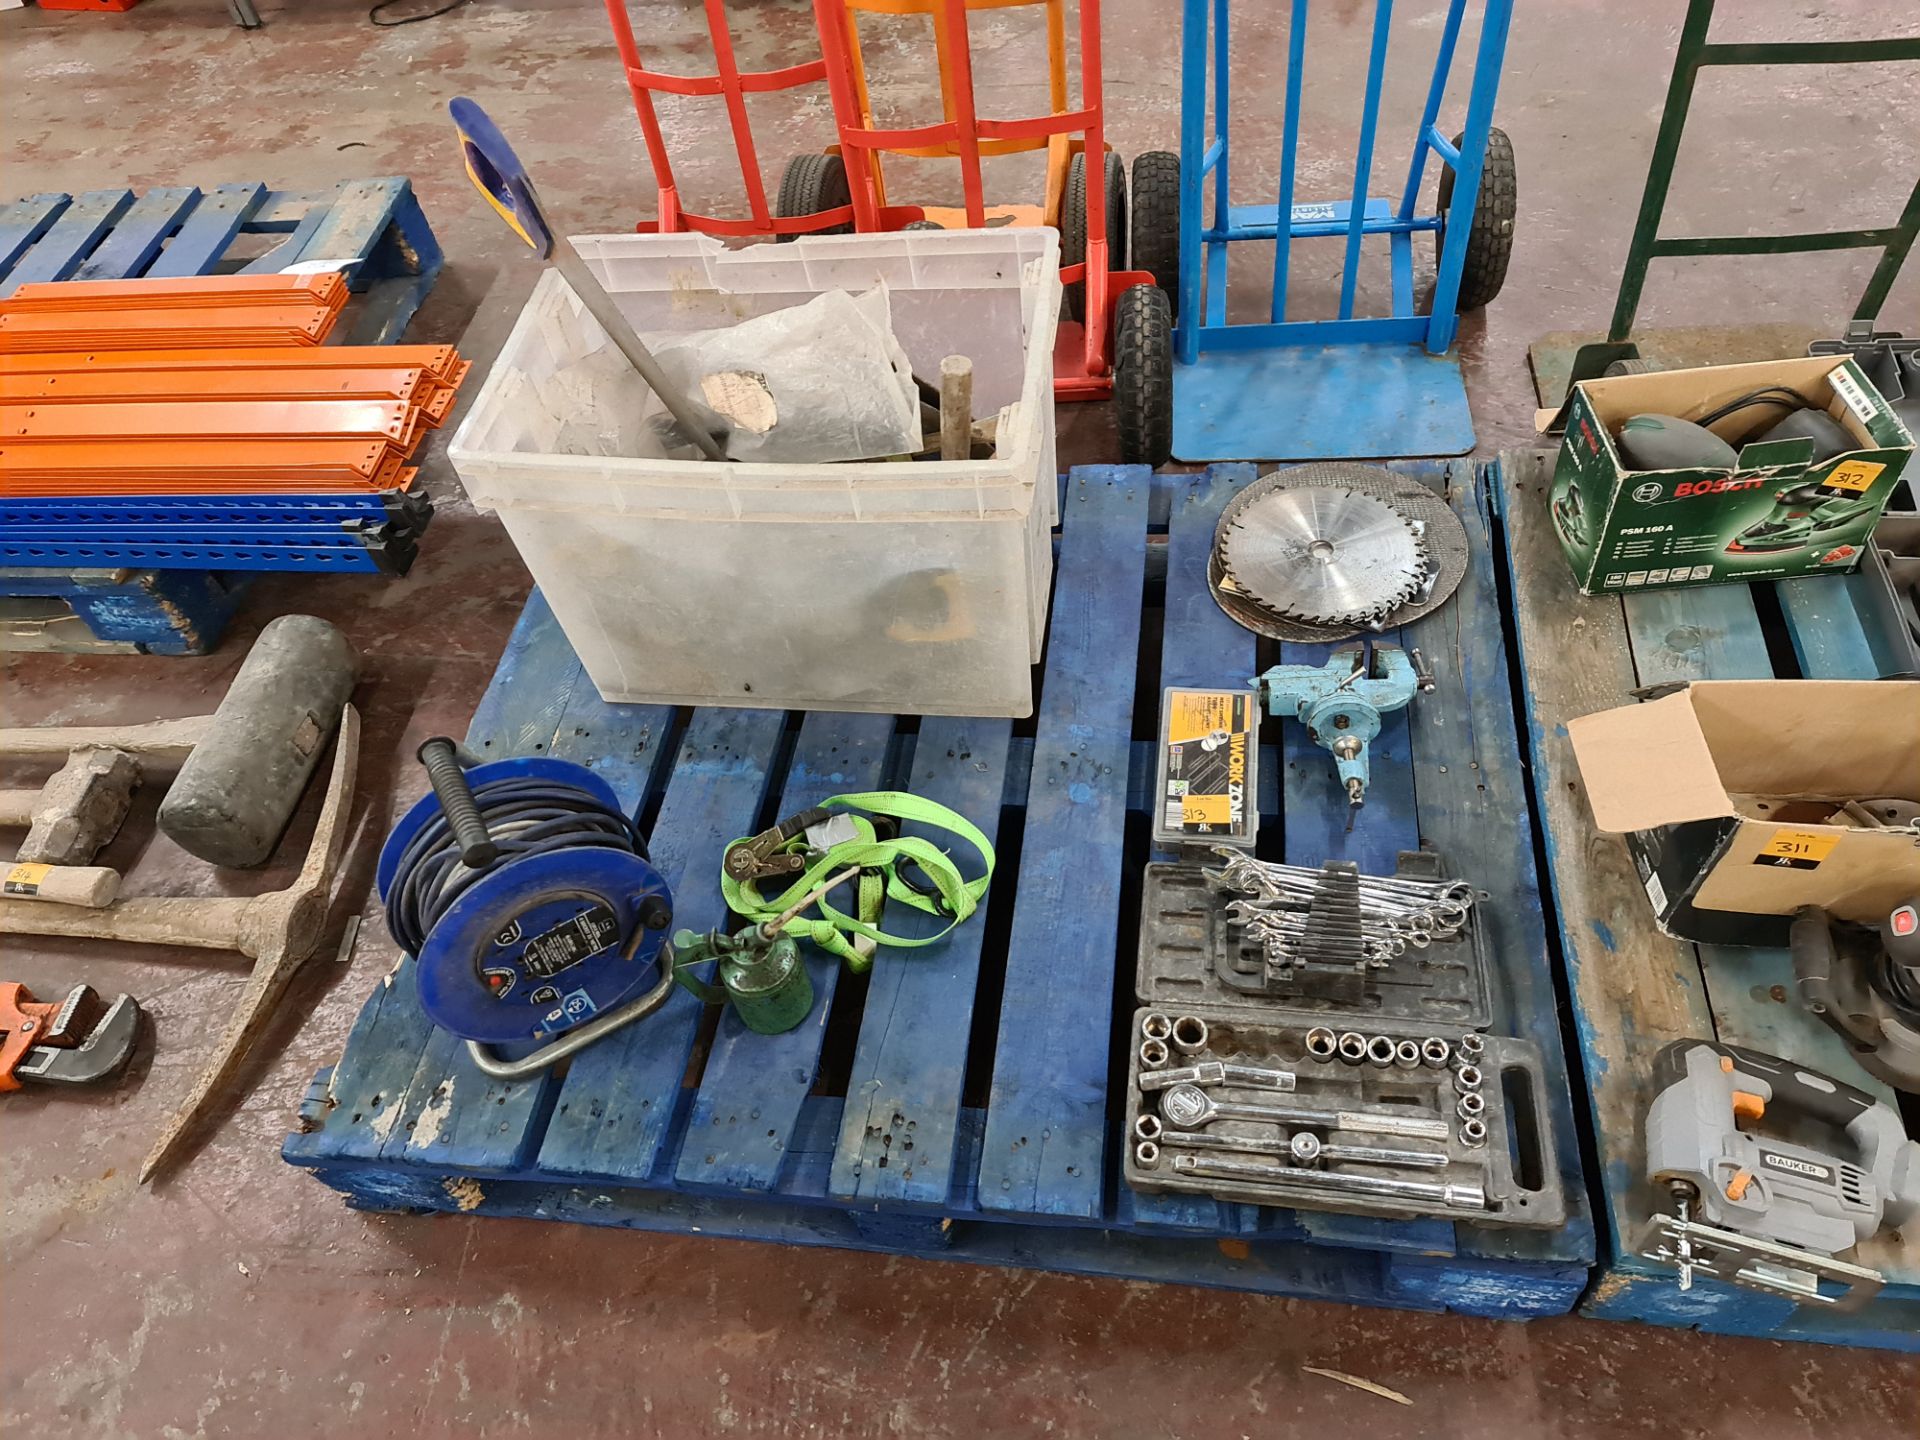 Total contents of a pallet of handtools and consumables including socket set, circular saw blades, r